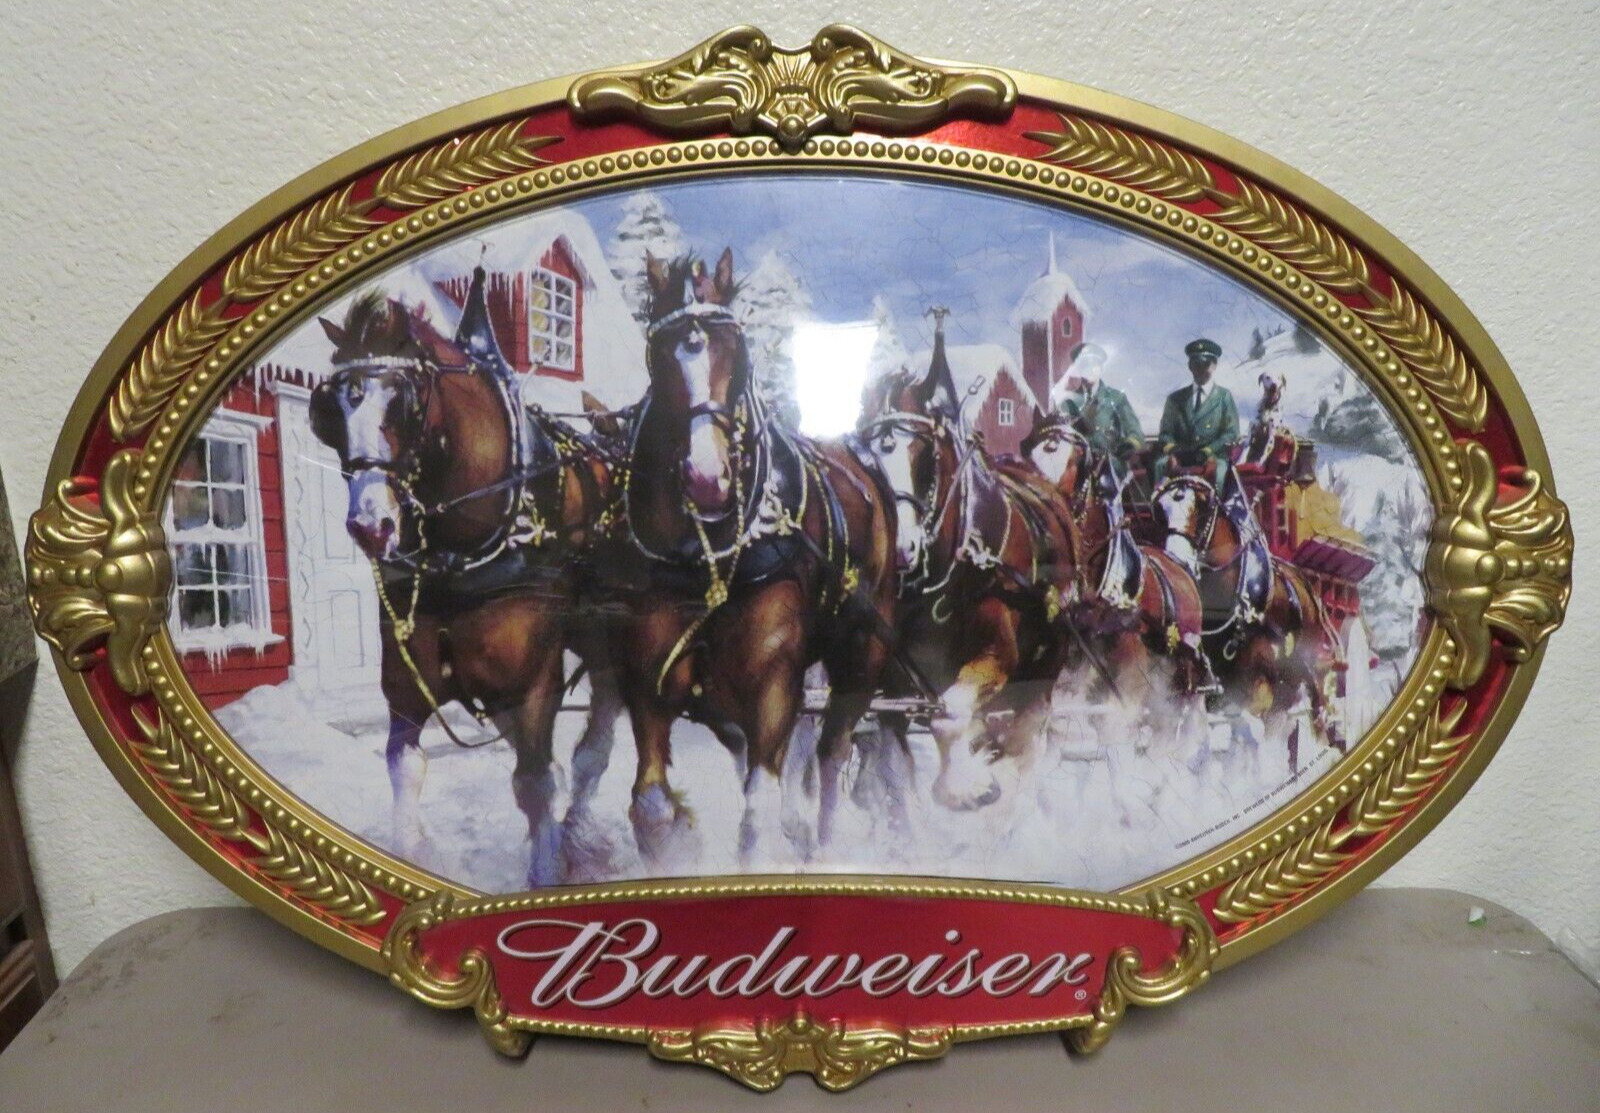 Anheuser-Busch 2000 Budweiser Winter Large Clydesdale Horses Oval Sign